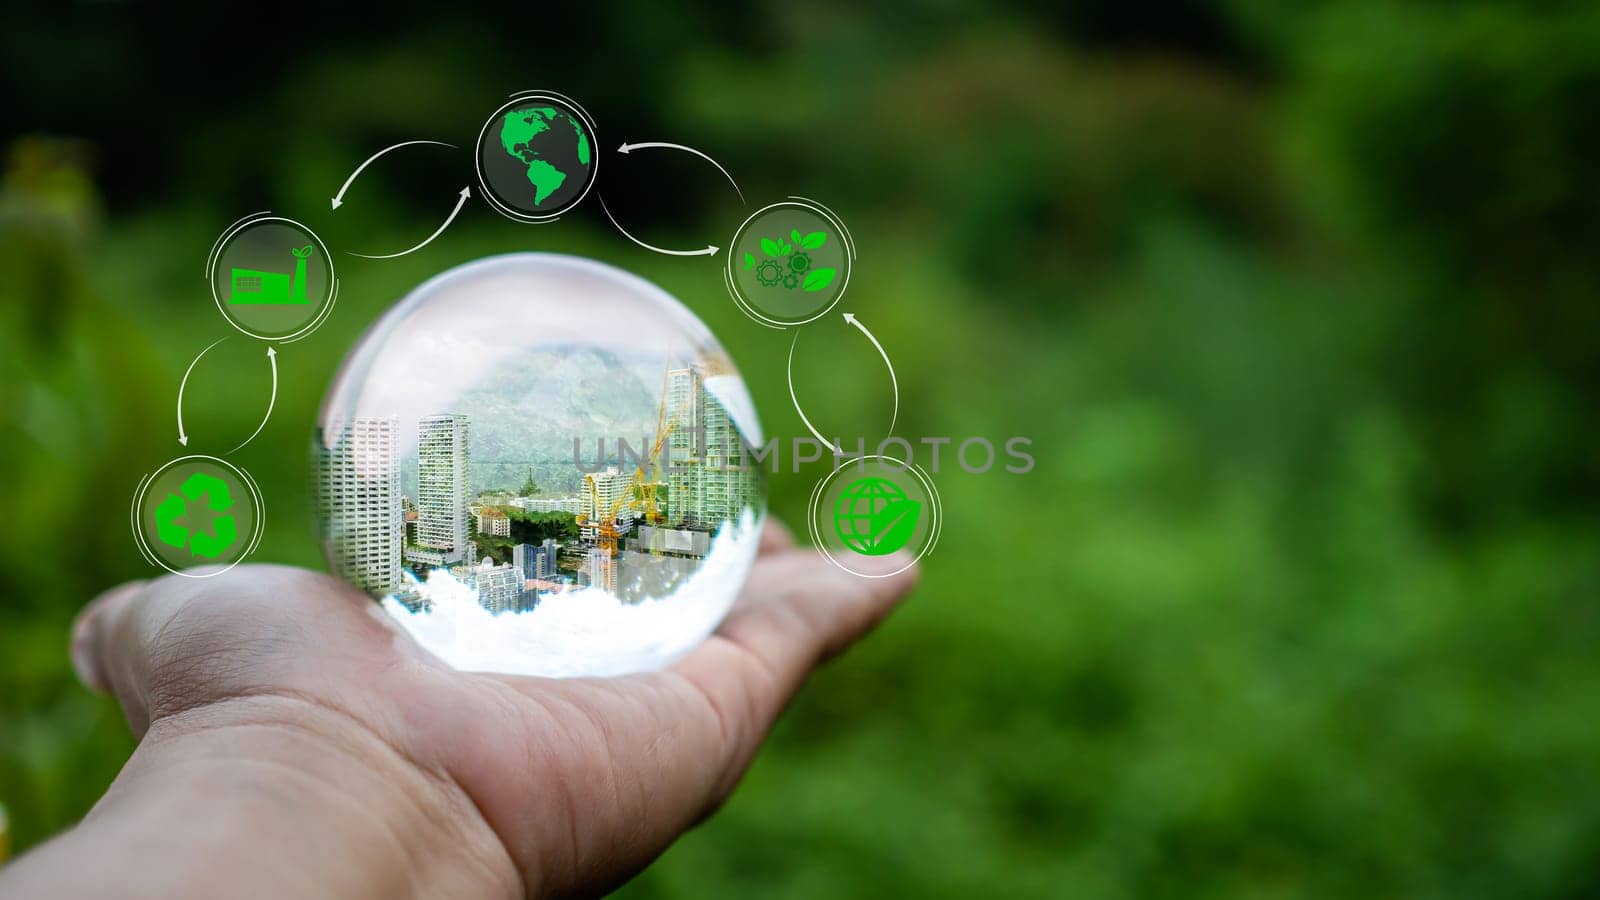 Concept of renewable energy, environmental protection, and sustainable renewable energy sources. An image of a building under construction in crystal glass resting on a person's hand and with a natural green background. Clean energy. by Unimages2527